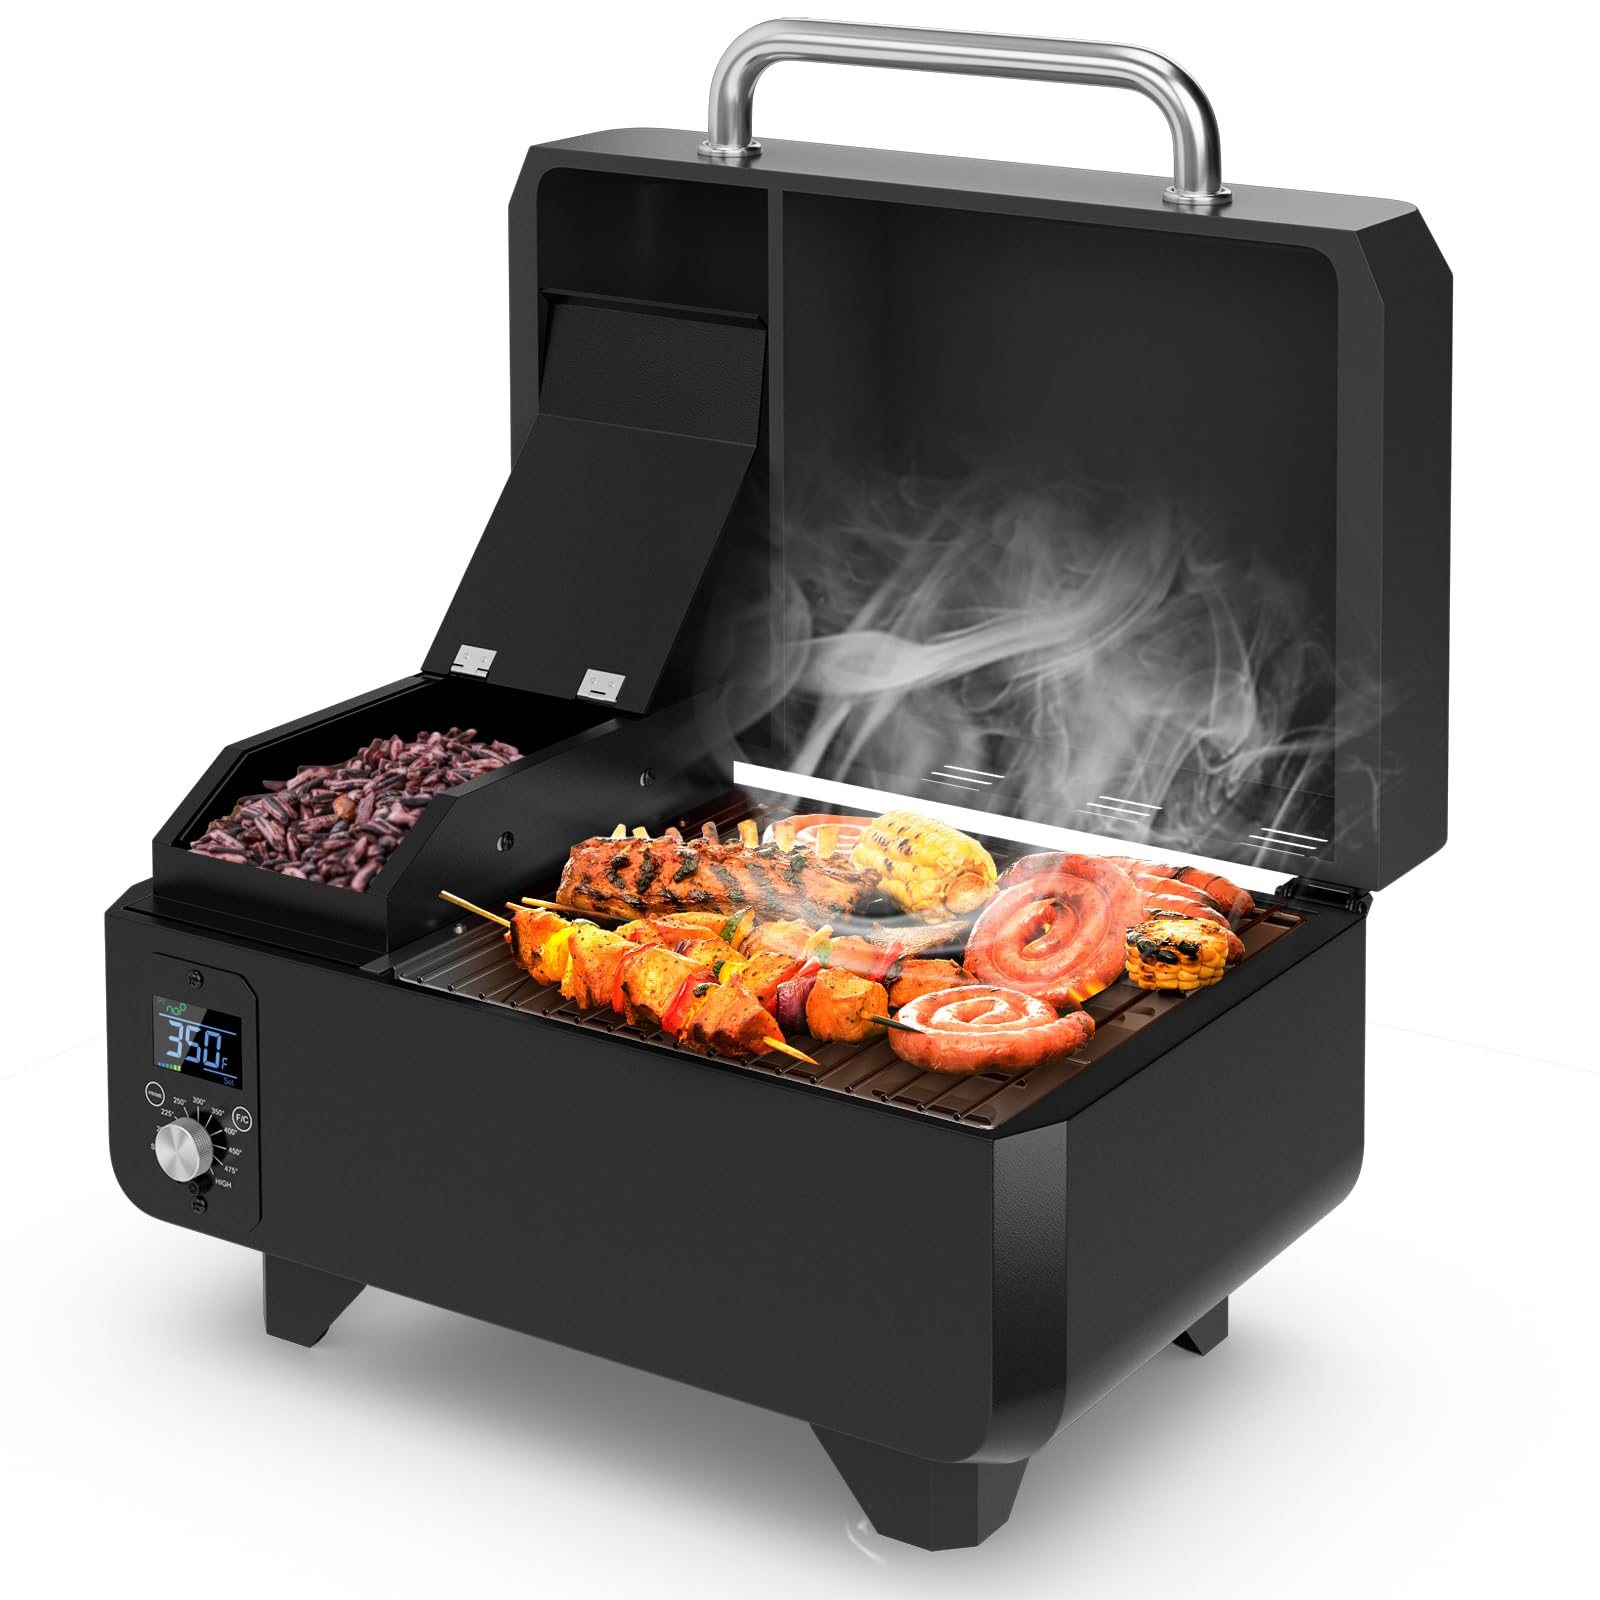 Giantex Pellet Grill and Smoker - Portable Tabletop Wood Pellet Smoker with Temperature Control